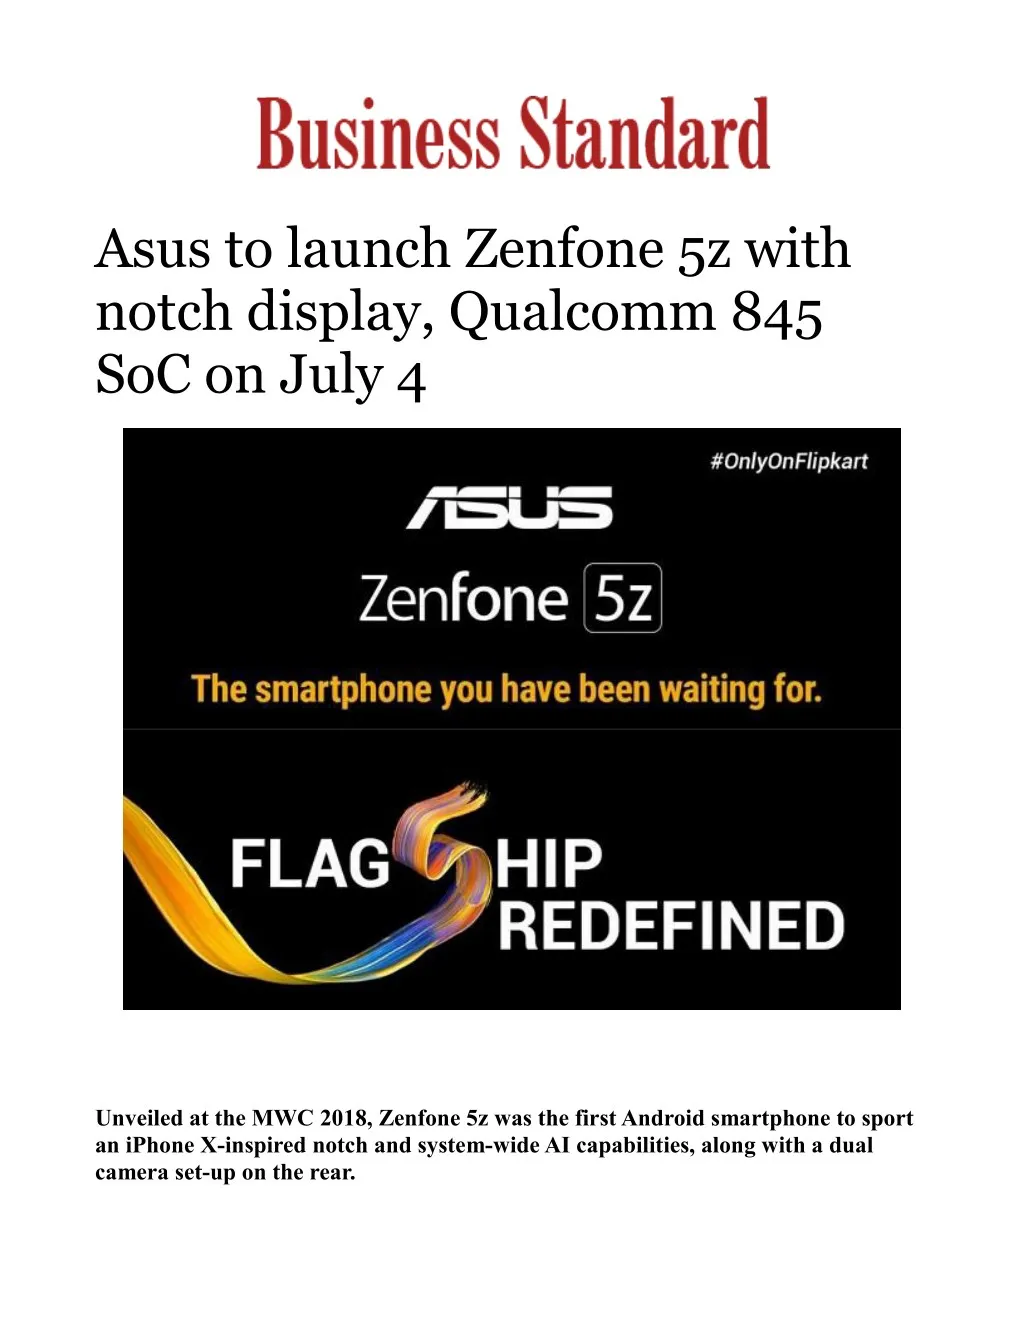 asus to launch zenfone 5z with notch display